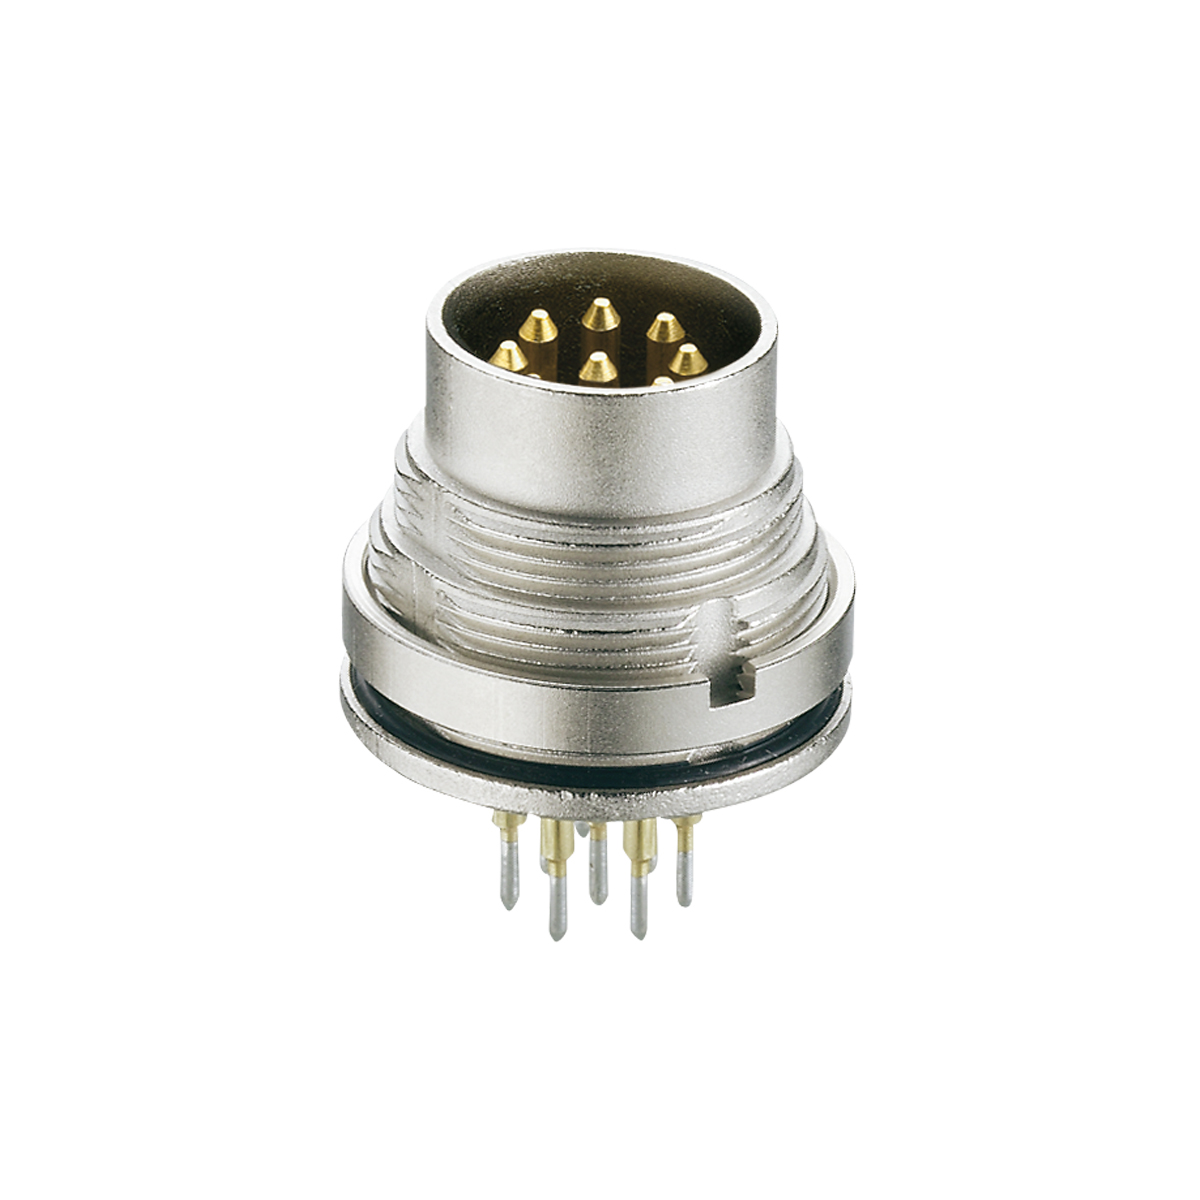 Lumberg: 0317-1 (Series 03 | Circular connectors with threaded joint M16 acc. to IEC 61076-2-106, IP40/IP68)